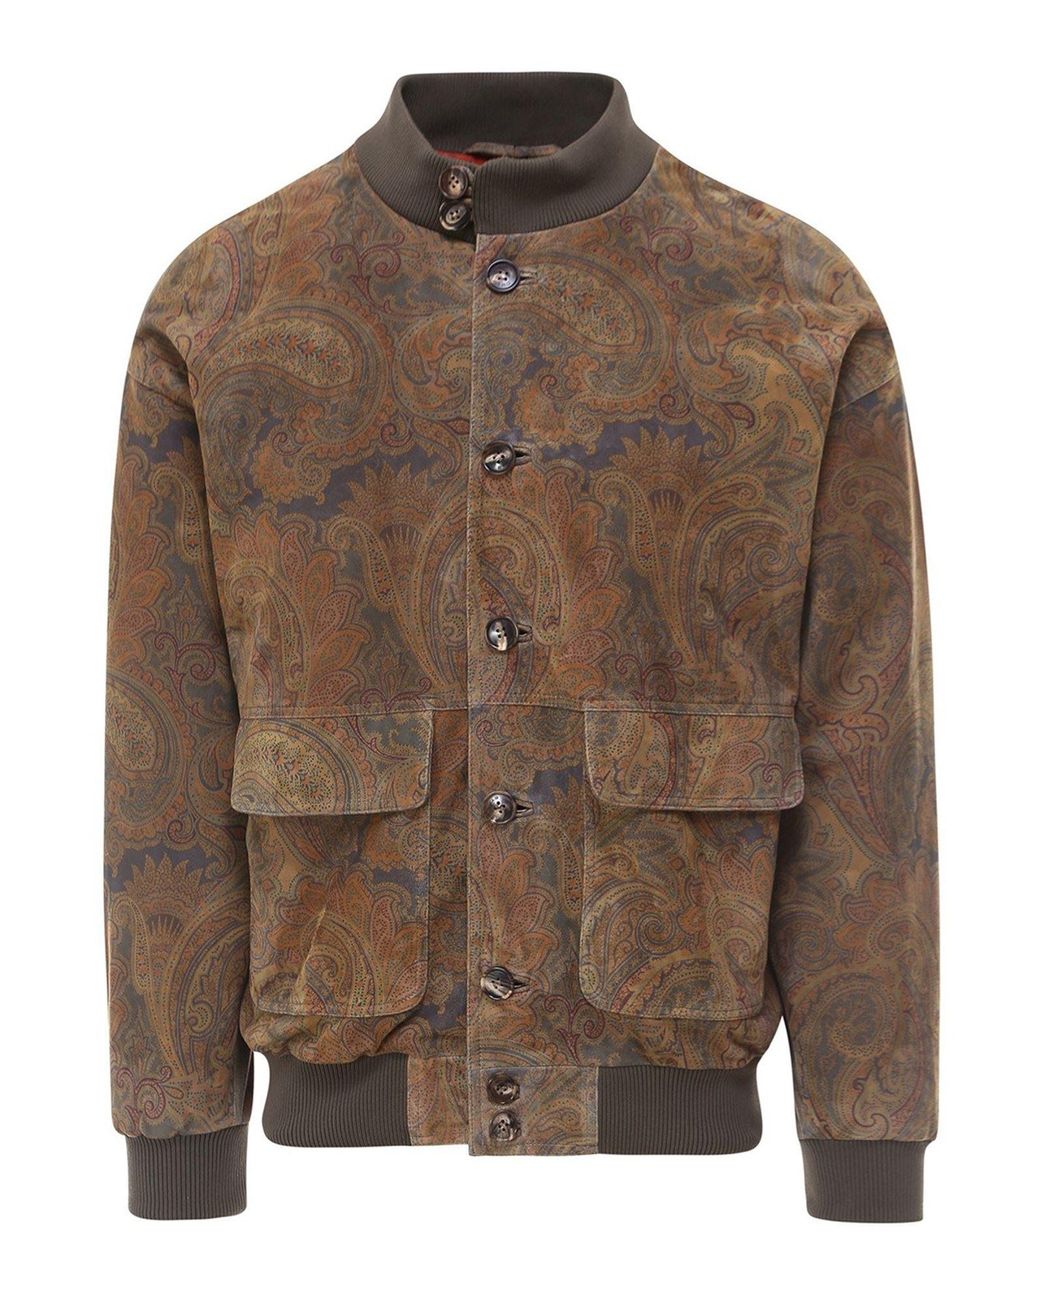 Etro Suede Paisley Jacquard Bomber Jacket in Brown for Men - Lyst